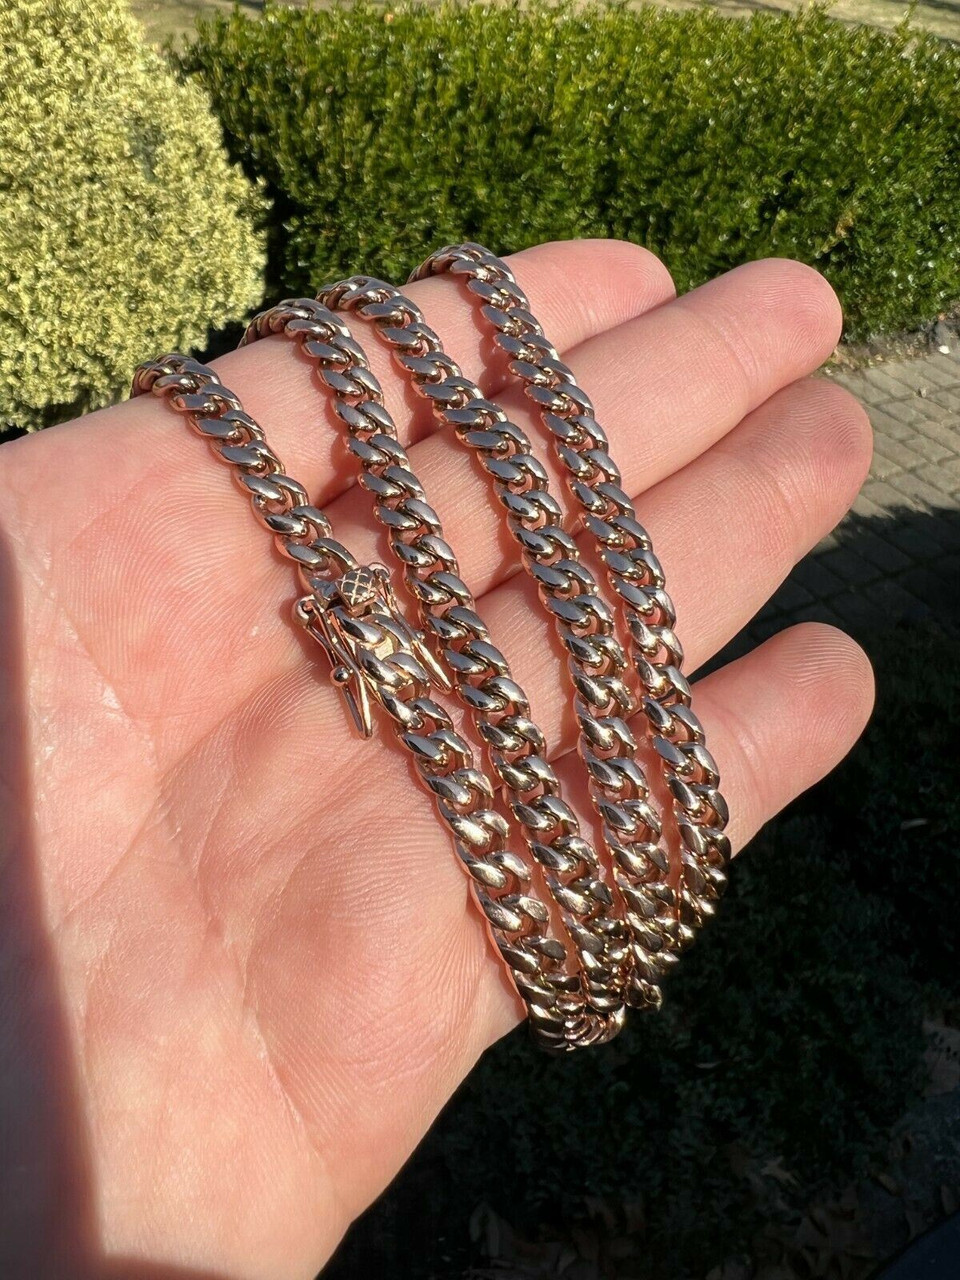 Miami Cuban Link Chain Necklace / Bracelet Rose Gold Plated